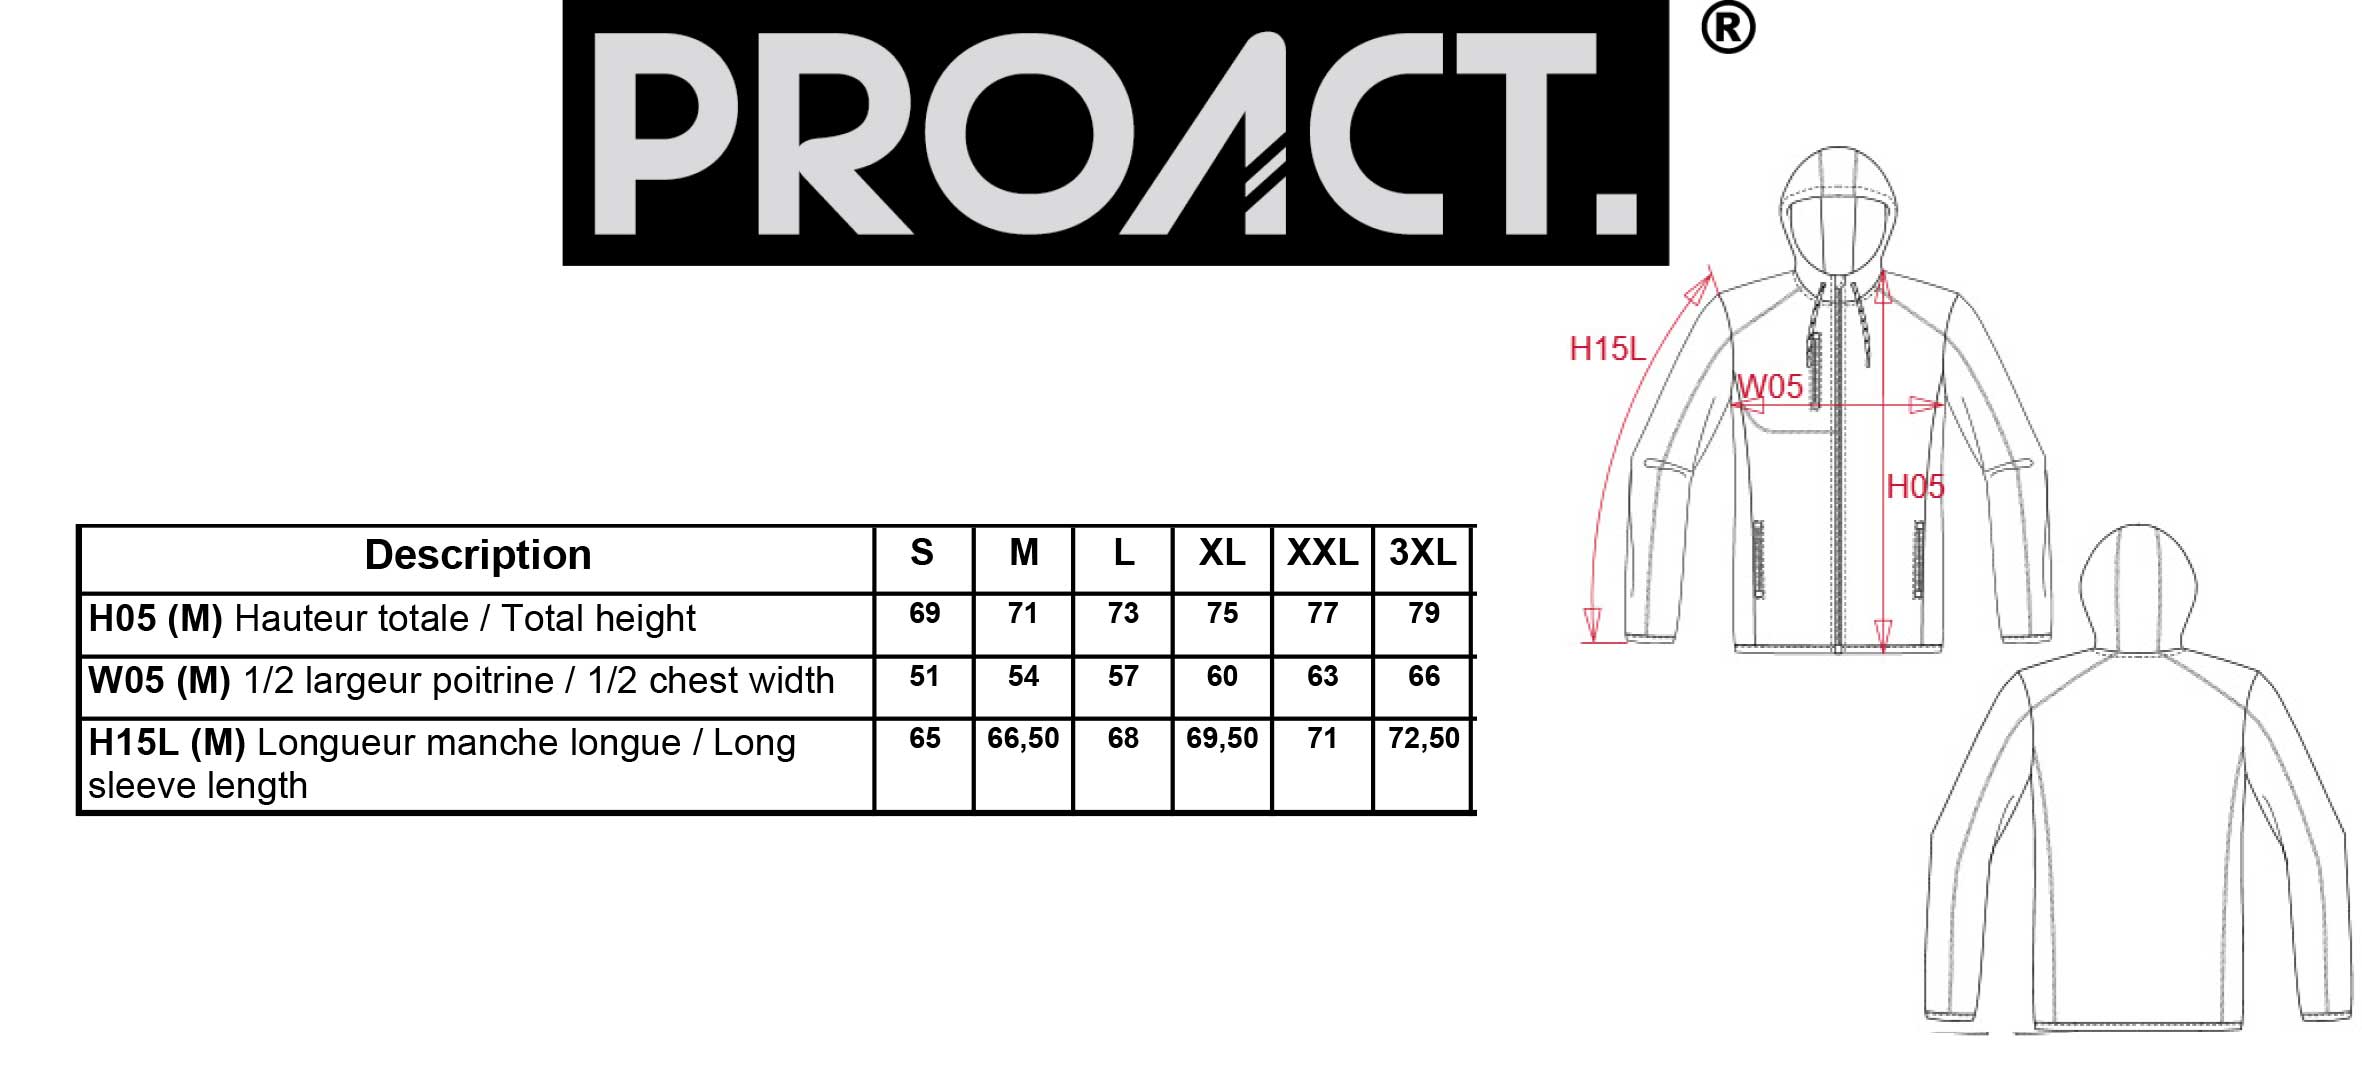 Size guide for choosing your proact jacket